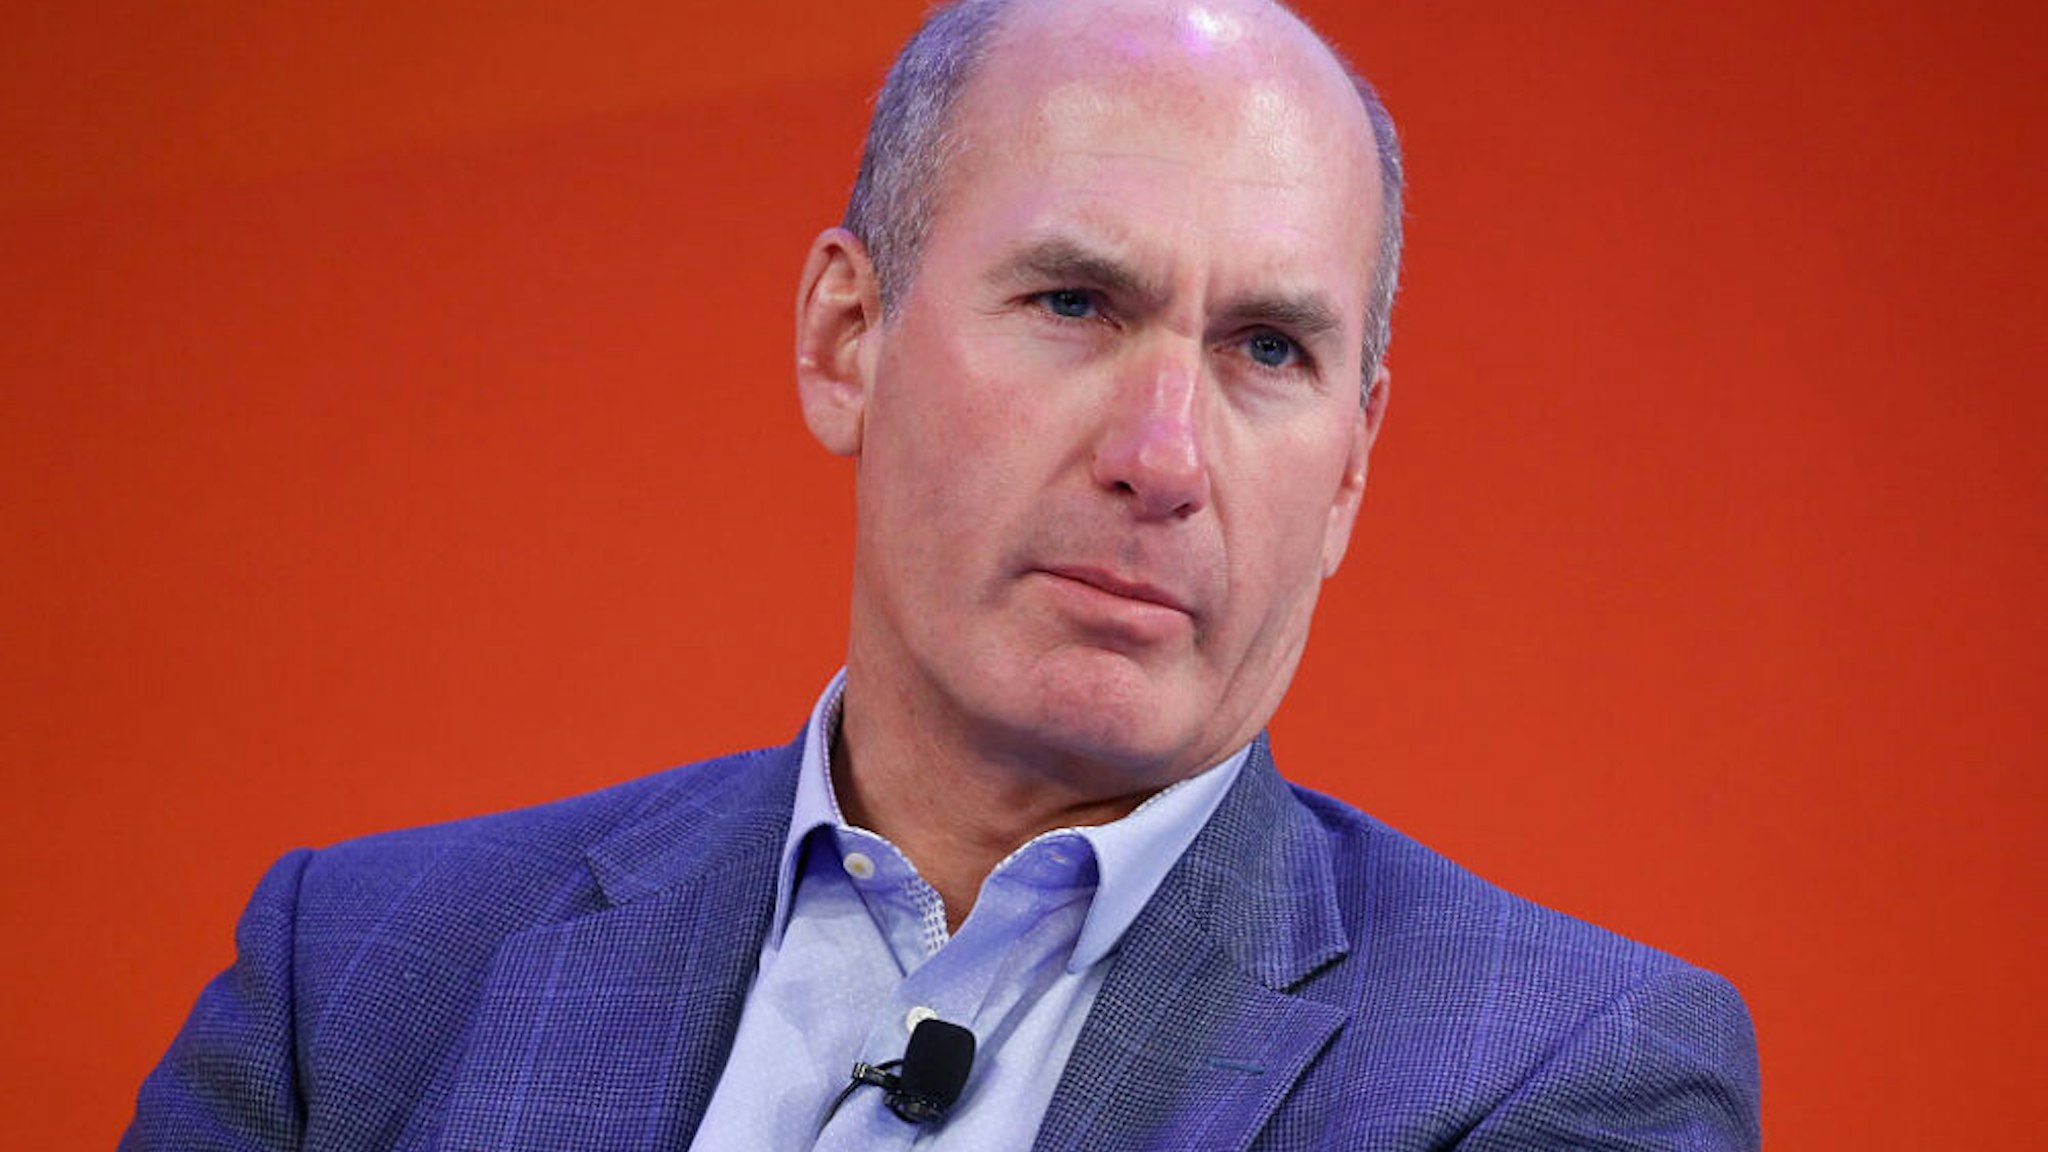 NEW YORK, NY - SEPTEMBER 28: CEO, AT&amp;T Entertainment Group AT&amp;T John Stankey speaks at the MediaLink Presents: MASS-terclass: The New Age of Mass Personalization panel on the Times Center Stage during 2016 Advertising Week New York on September 28, 2016 in New York City.